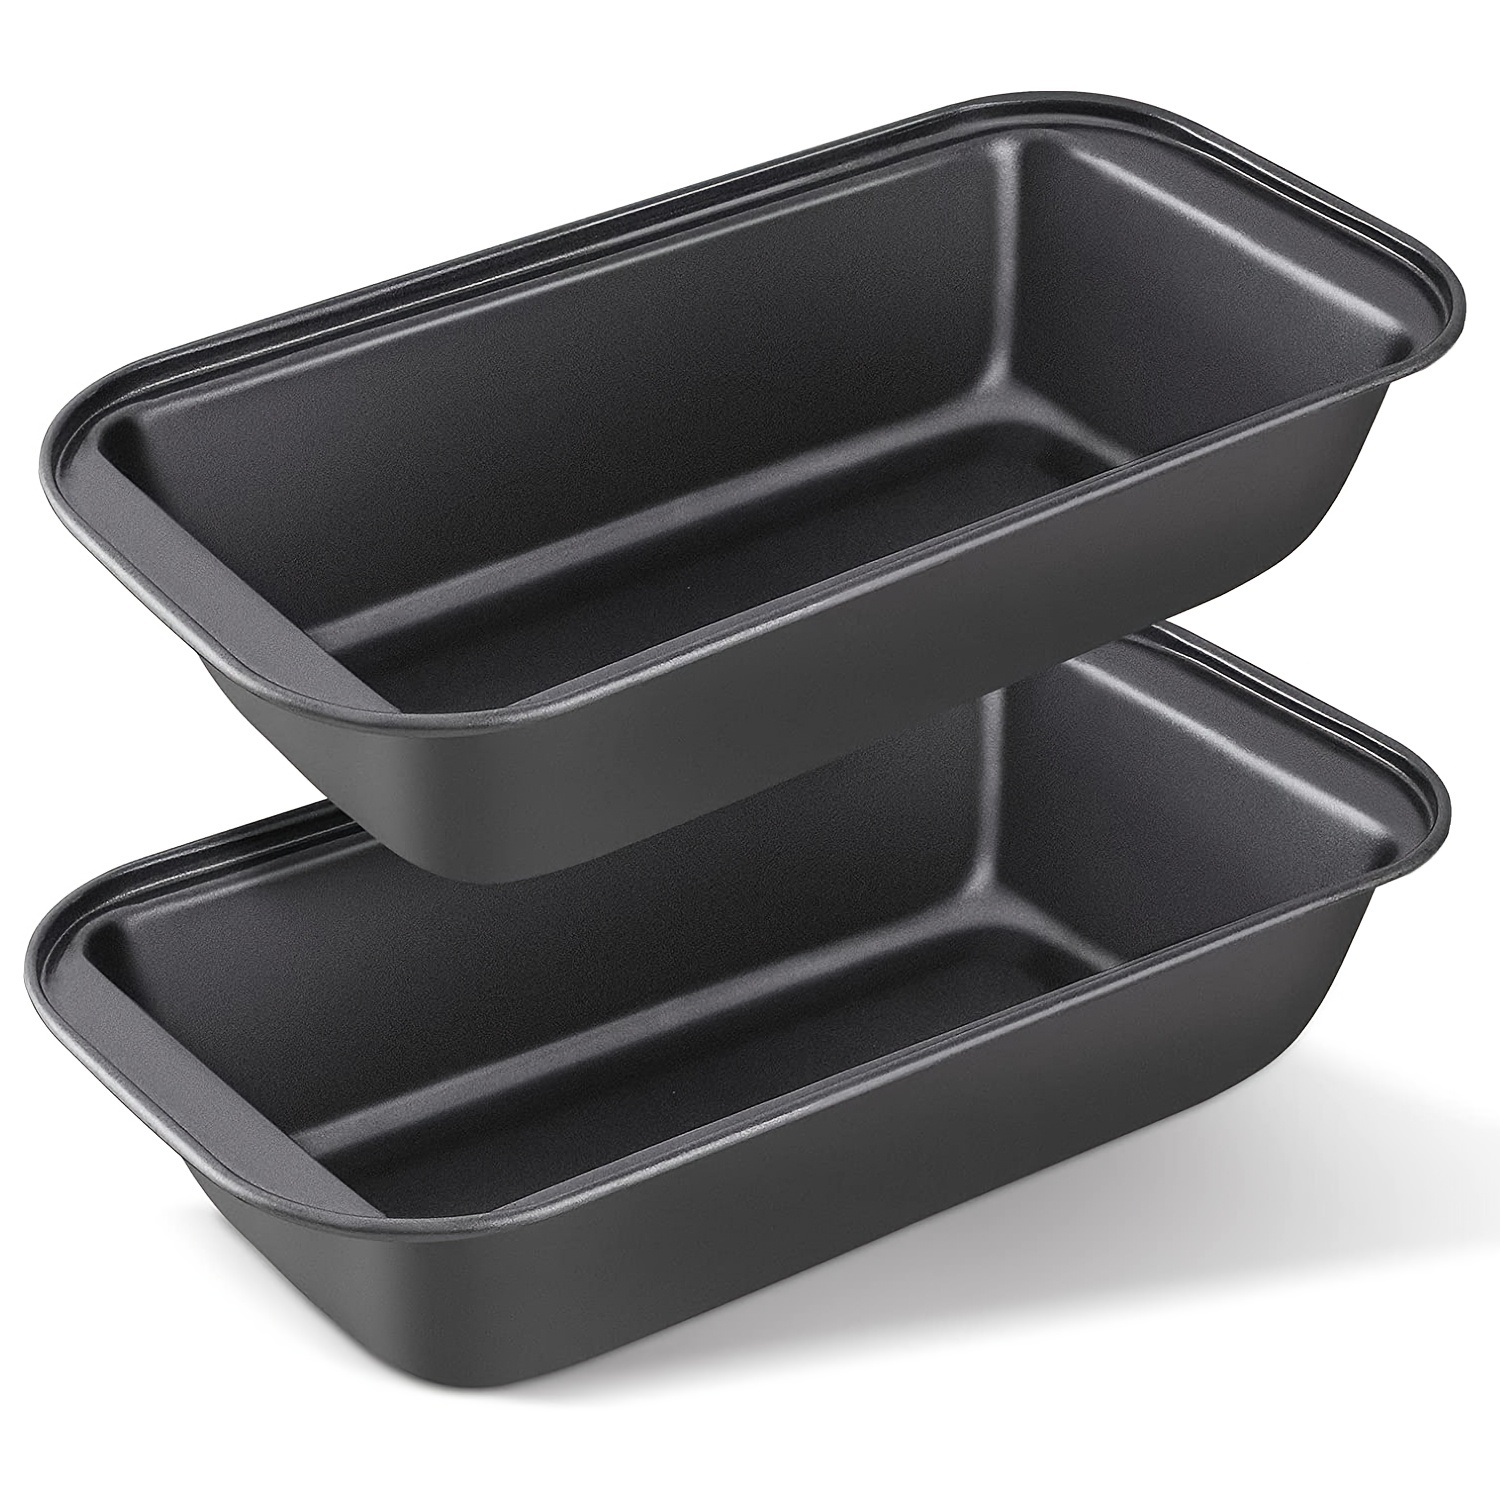 Non-Stick Bread Pan Set - Easy Grip Handles for Homemade Bread, Brownies,  and Pound Cakes - Carbon Steel Loaf Pans for Perfect Results